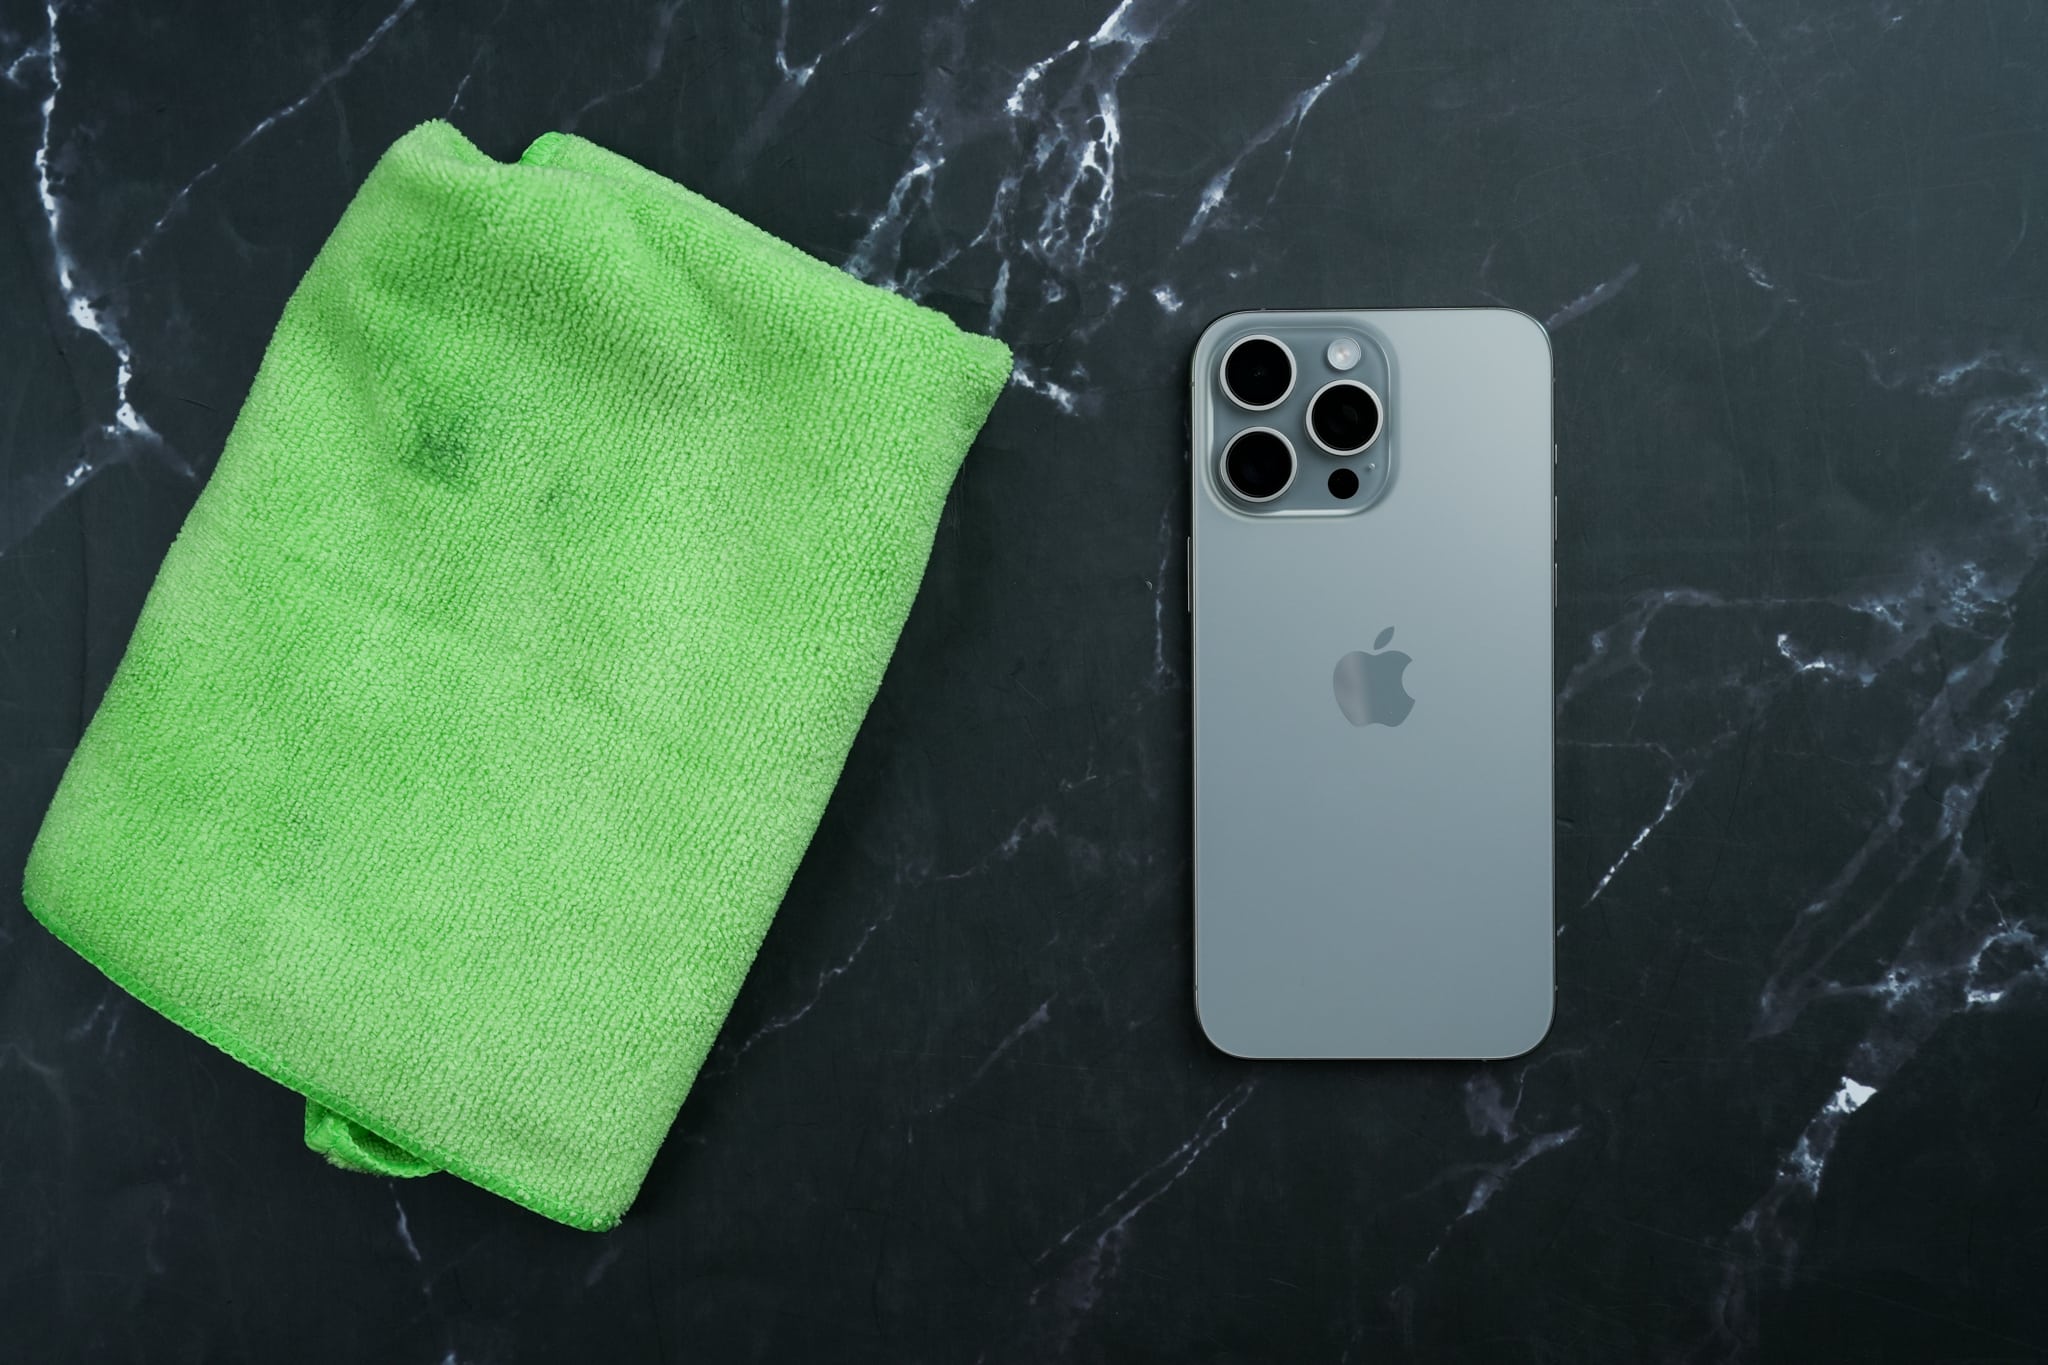 Clean your iPhone with a Micro Fiber cloth